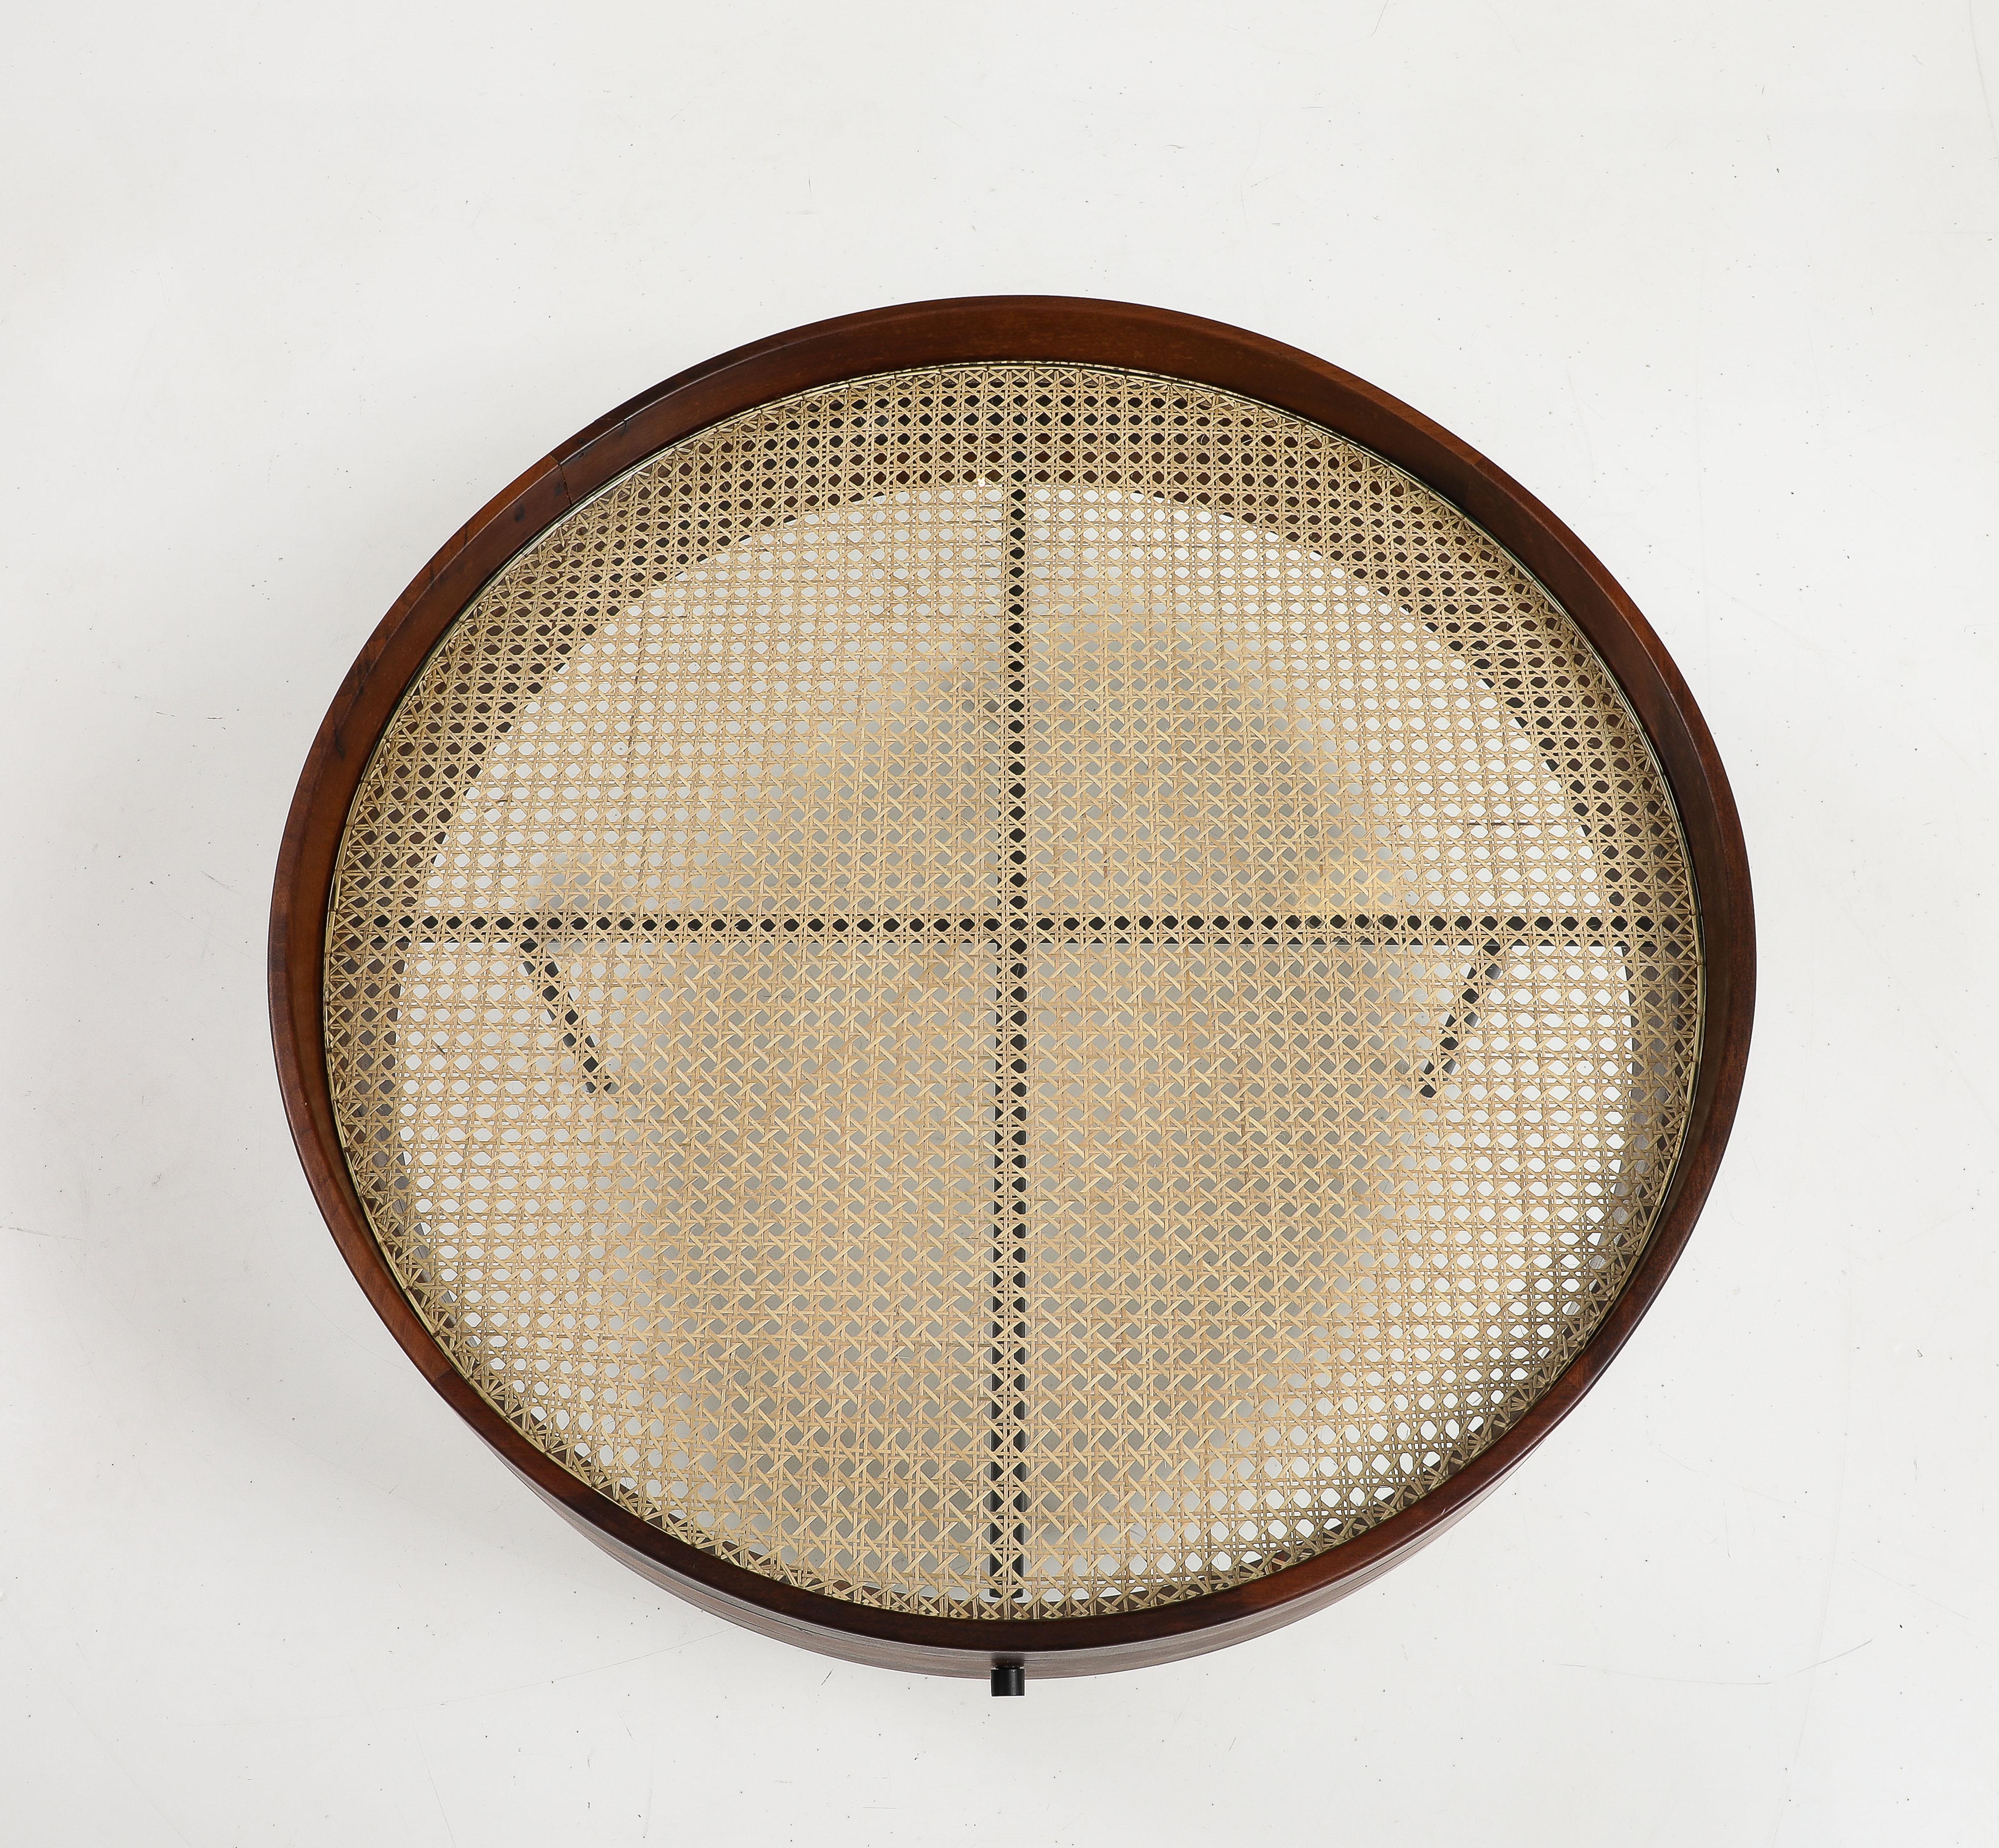 Caning Contemporary “Bernardo” Center Table by Gustavo Bittencourt, Brazil, 2021 For Sale